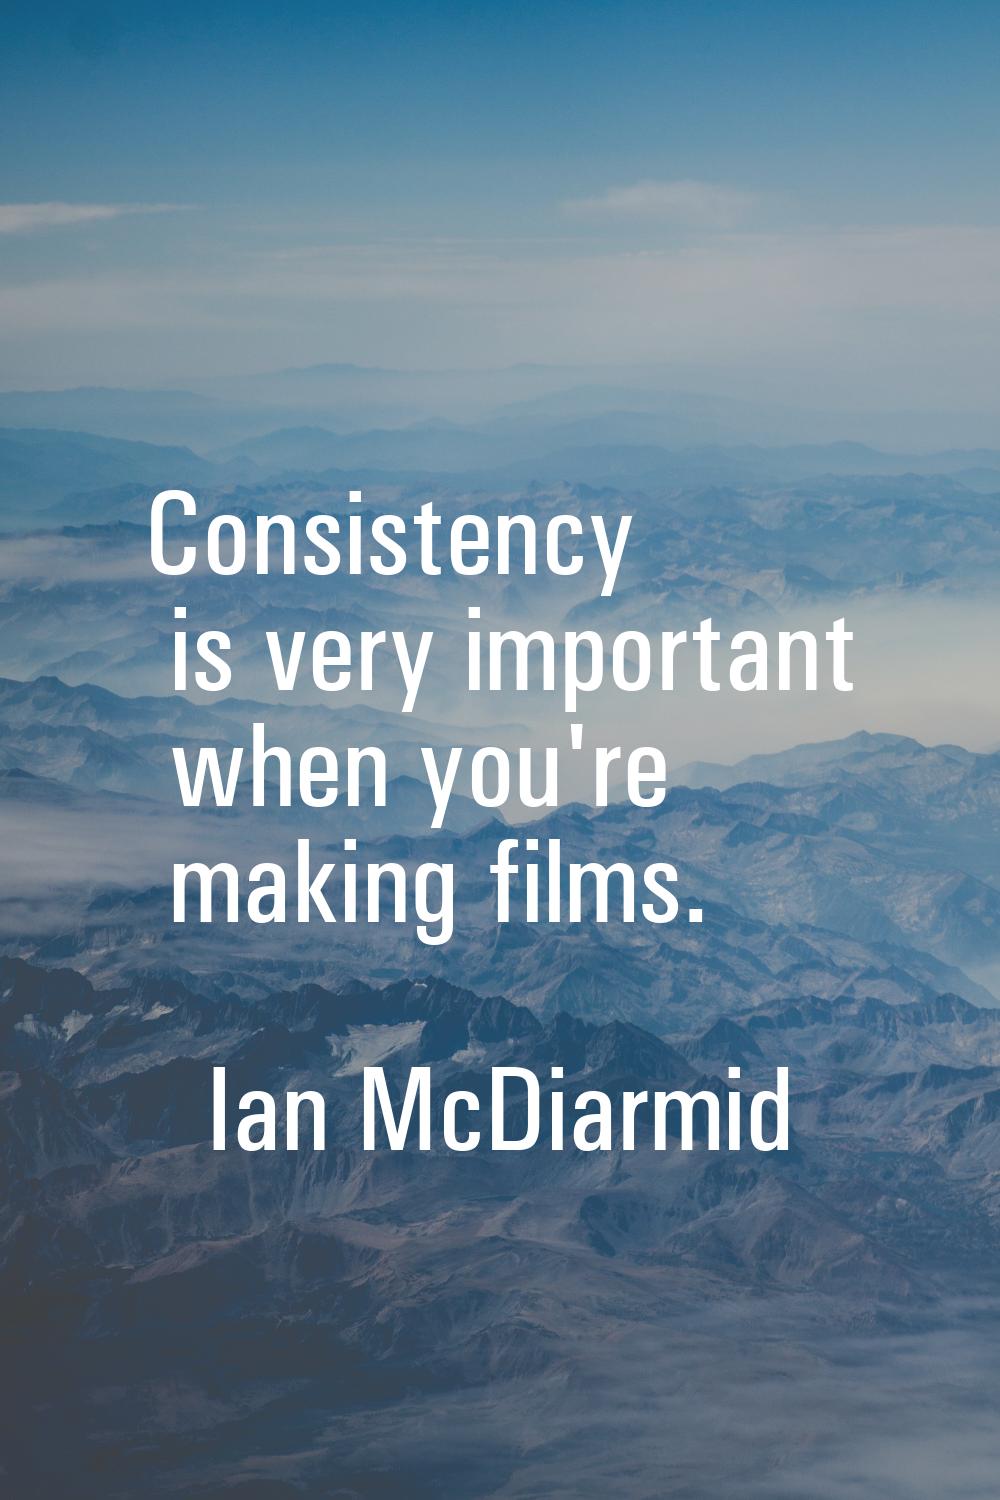 Consistency is very important when you're making films.